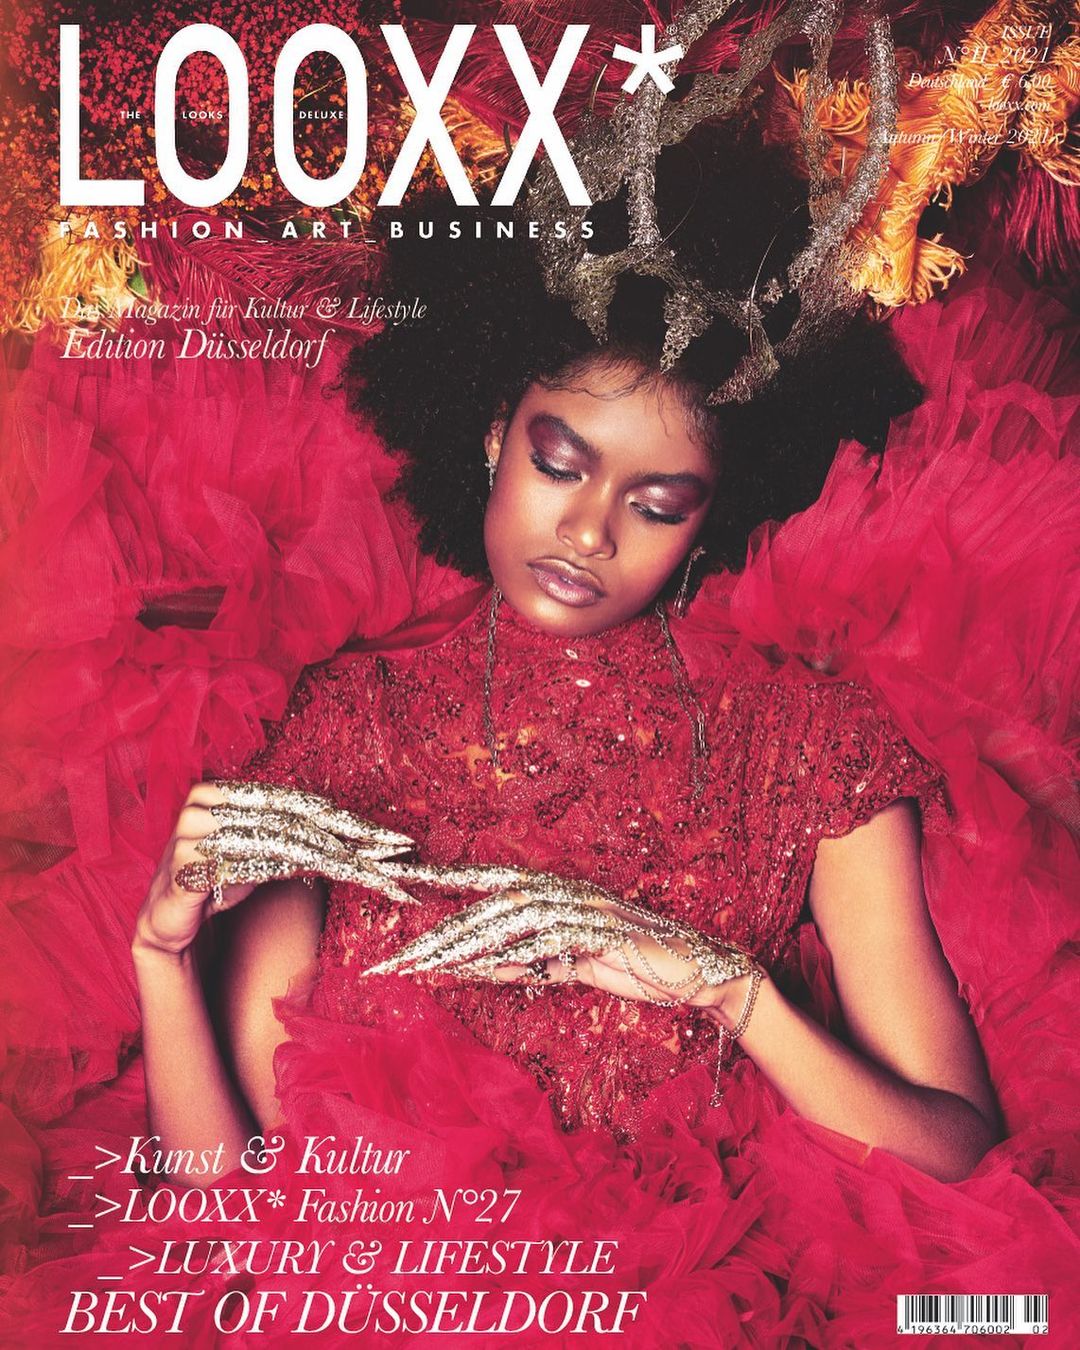 The cover of LOOXX* magazine features a model in a dramatic red ensemble, accentuated with Myril Jewels' signature full finger claw rings. The neo-gothic design brings a bold, avant-garde edge to the high fashion aesthetic, perfect for lovers of gothic-chic and standout Witchcore accessories.